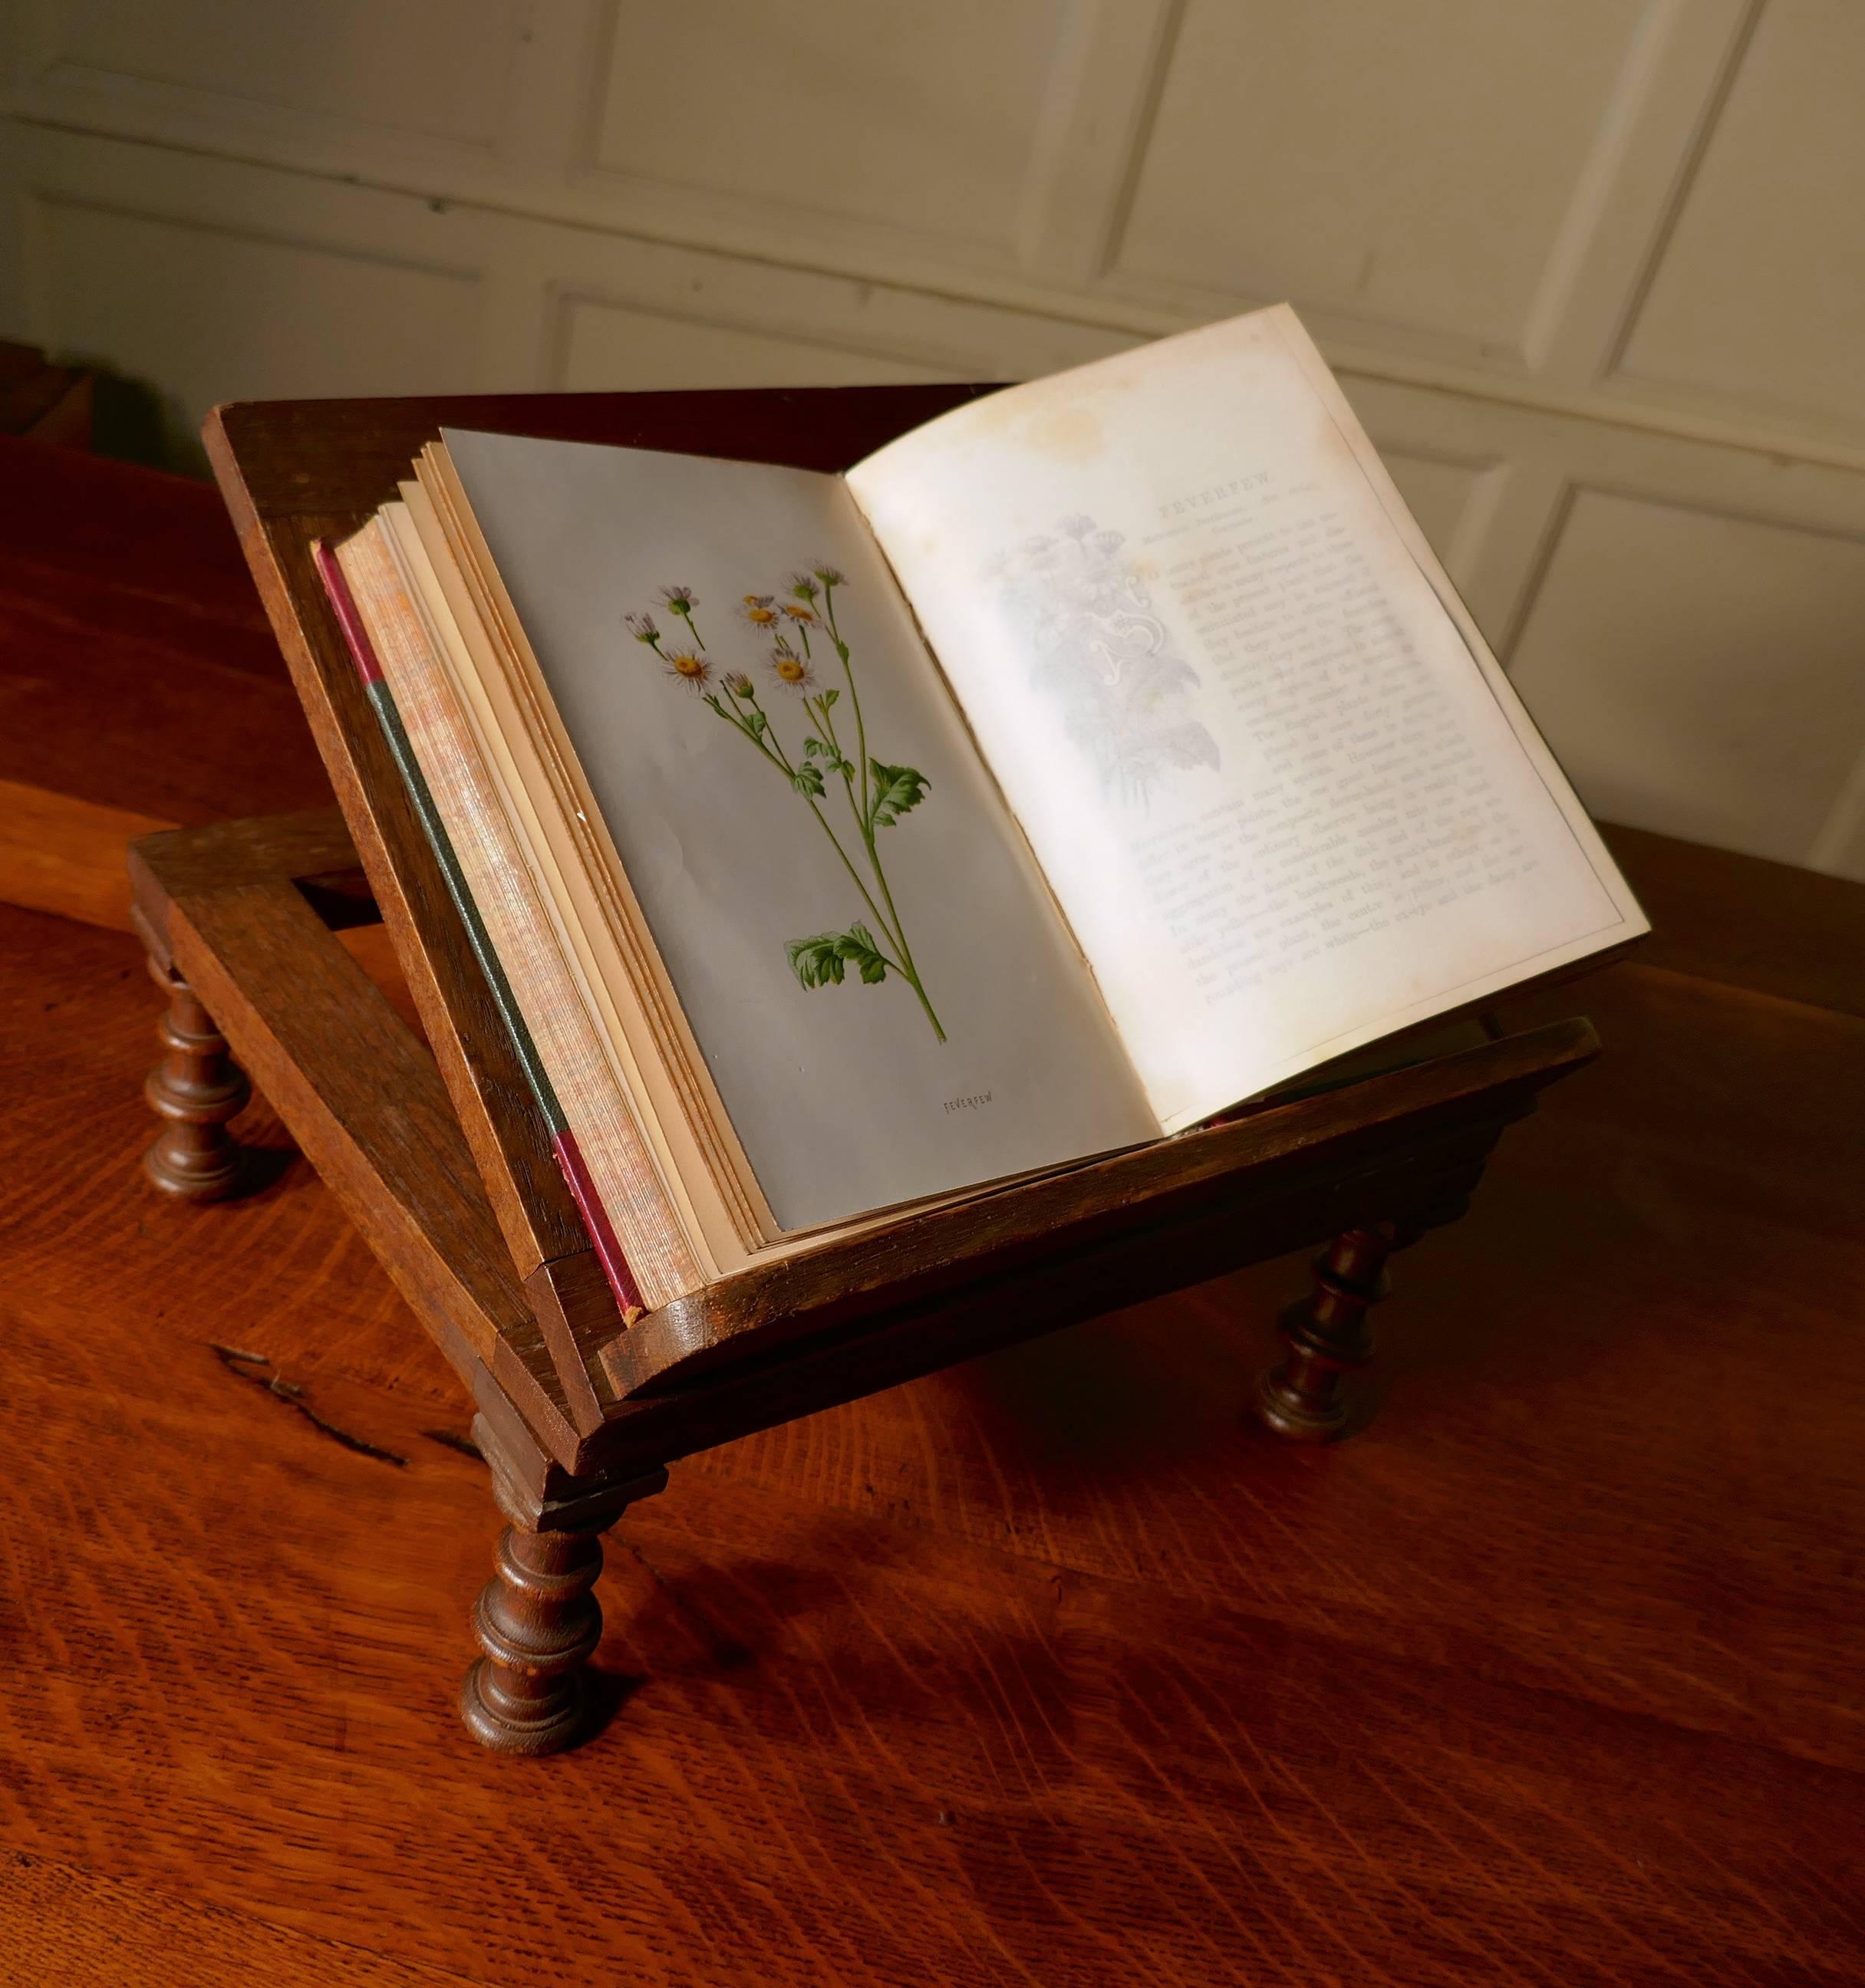 French swivelling oak book rest or music stand, Lutrin

This is a charming piece, it is made in solid oak and dates from the end of the 19th century, it has been superbly hand crafted by a skilful master.

The base of the stand is set on dainty